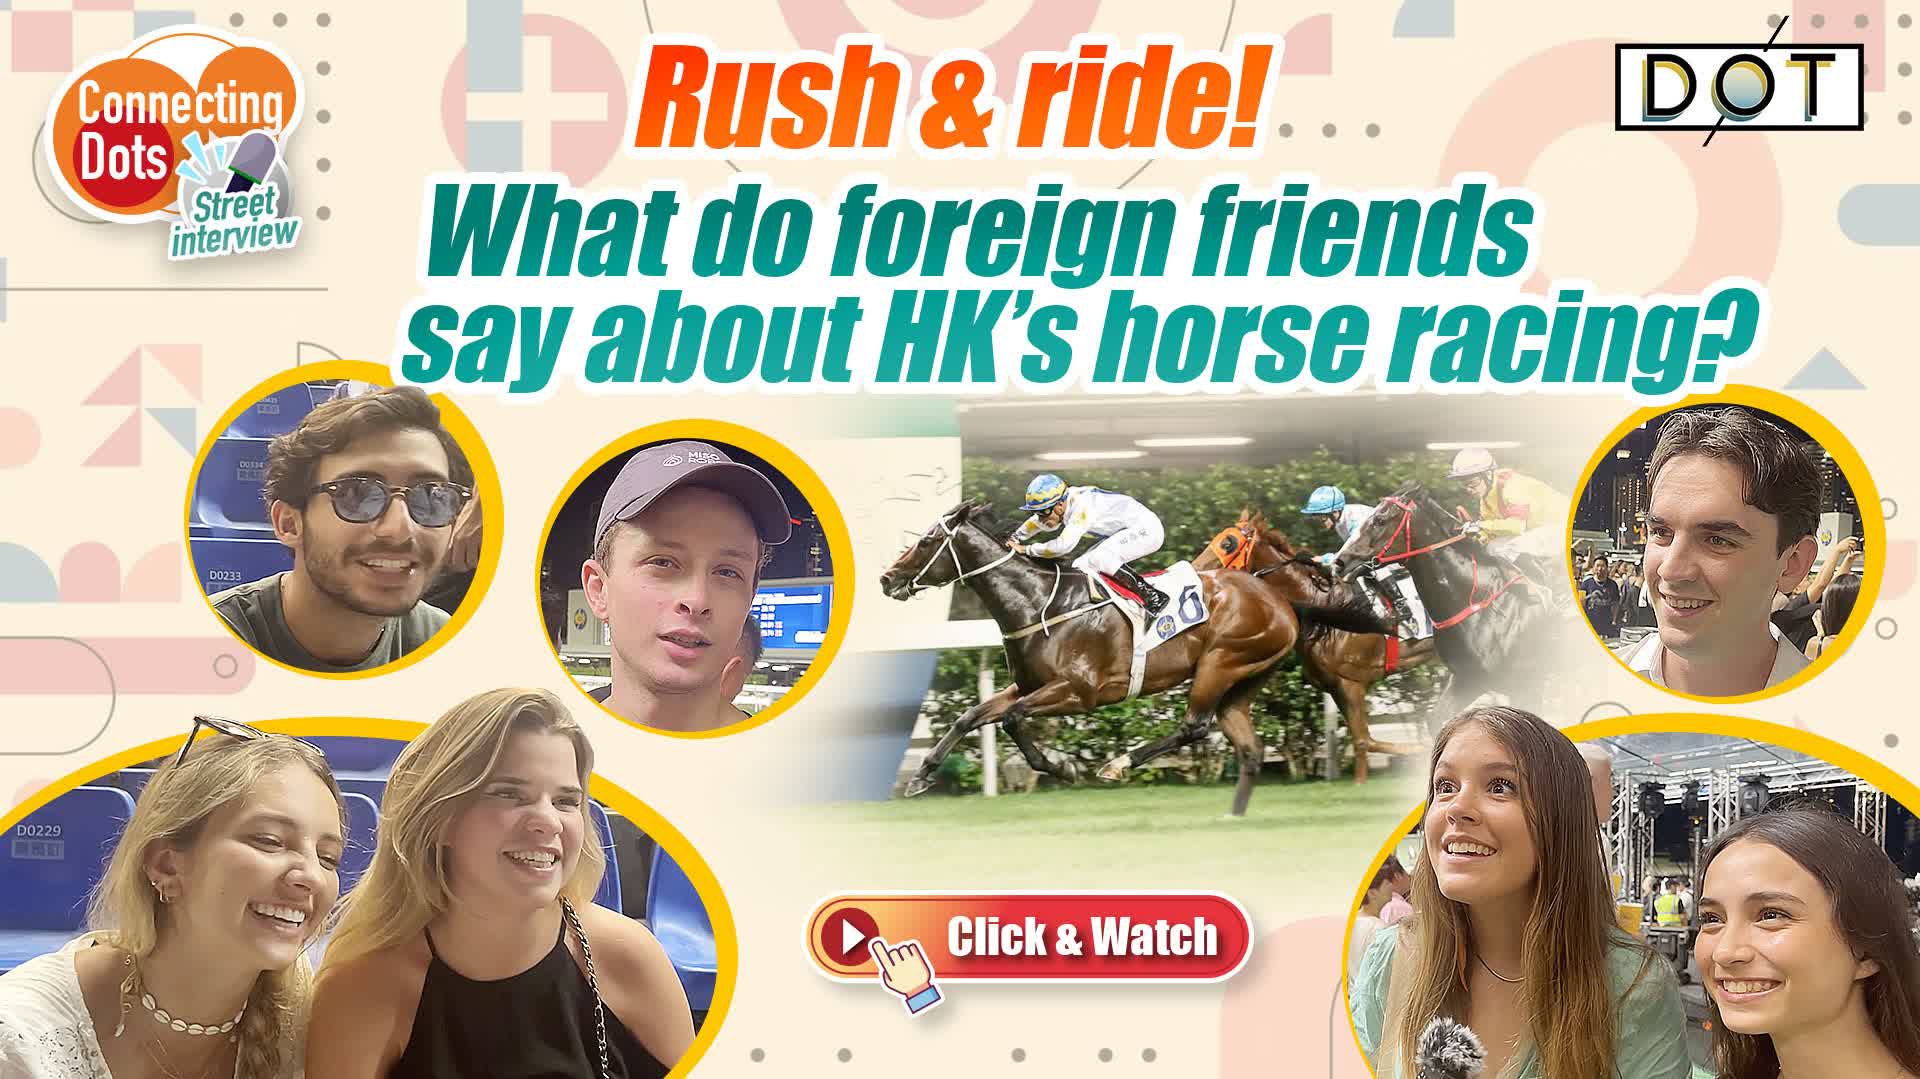 Connecting Dots | Rush & ride! What do foreign friends say about HK’s horse racing?